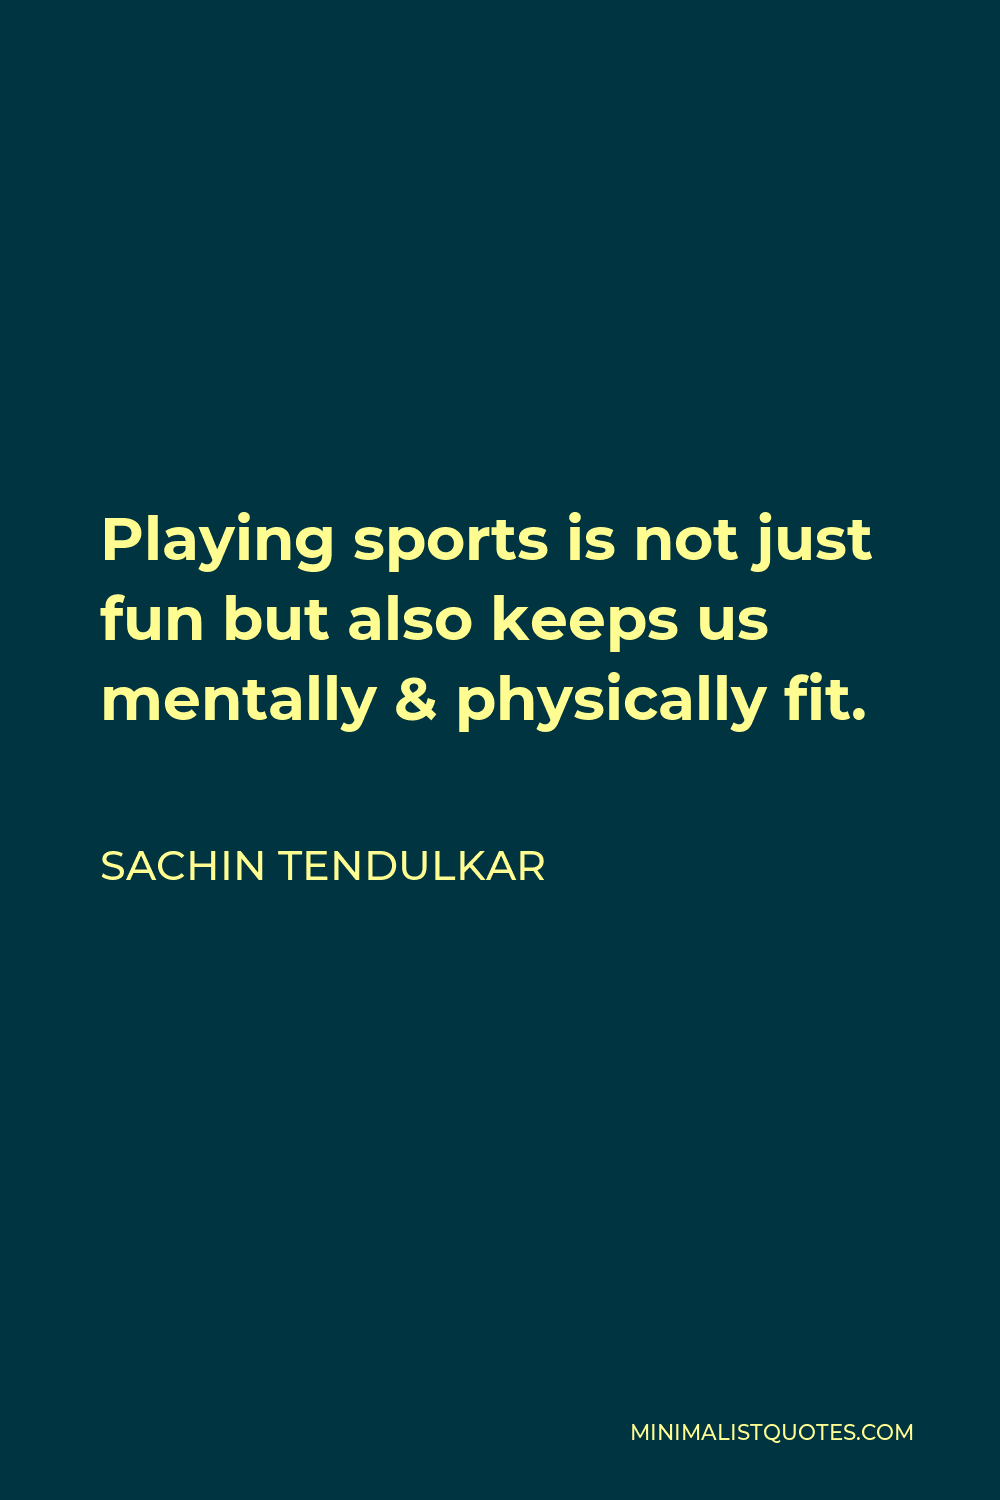 Sachin Tendulkar Quote - Playing sports is not just fun but also keeps us mentally & physically fit.